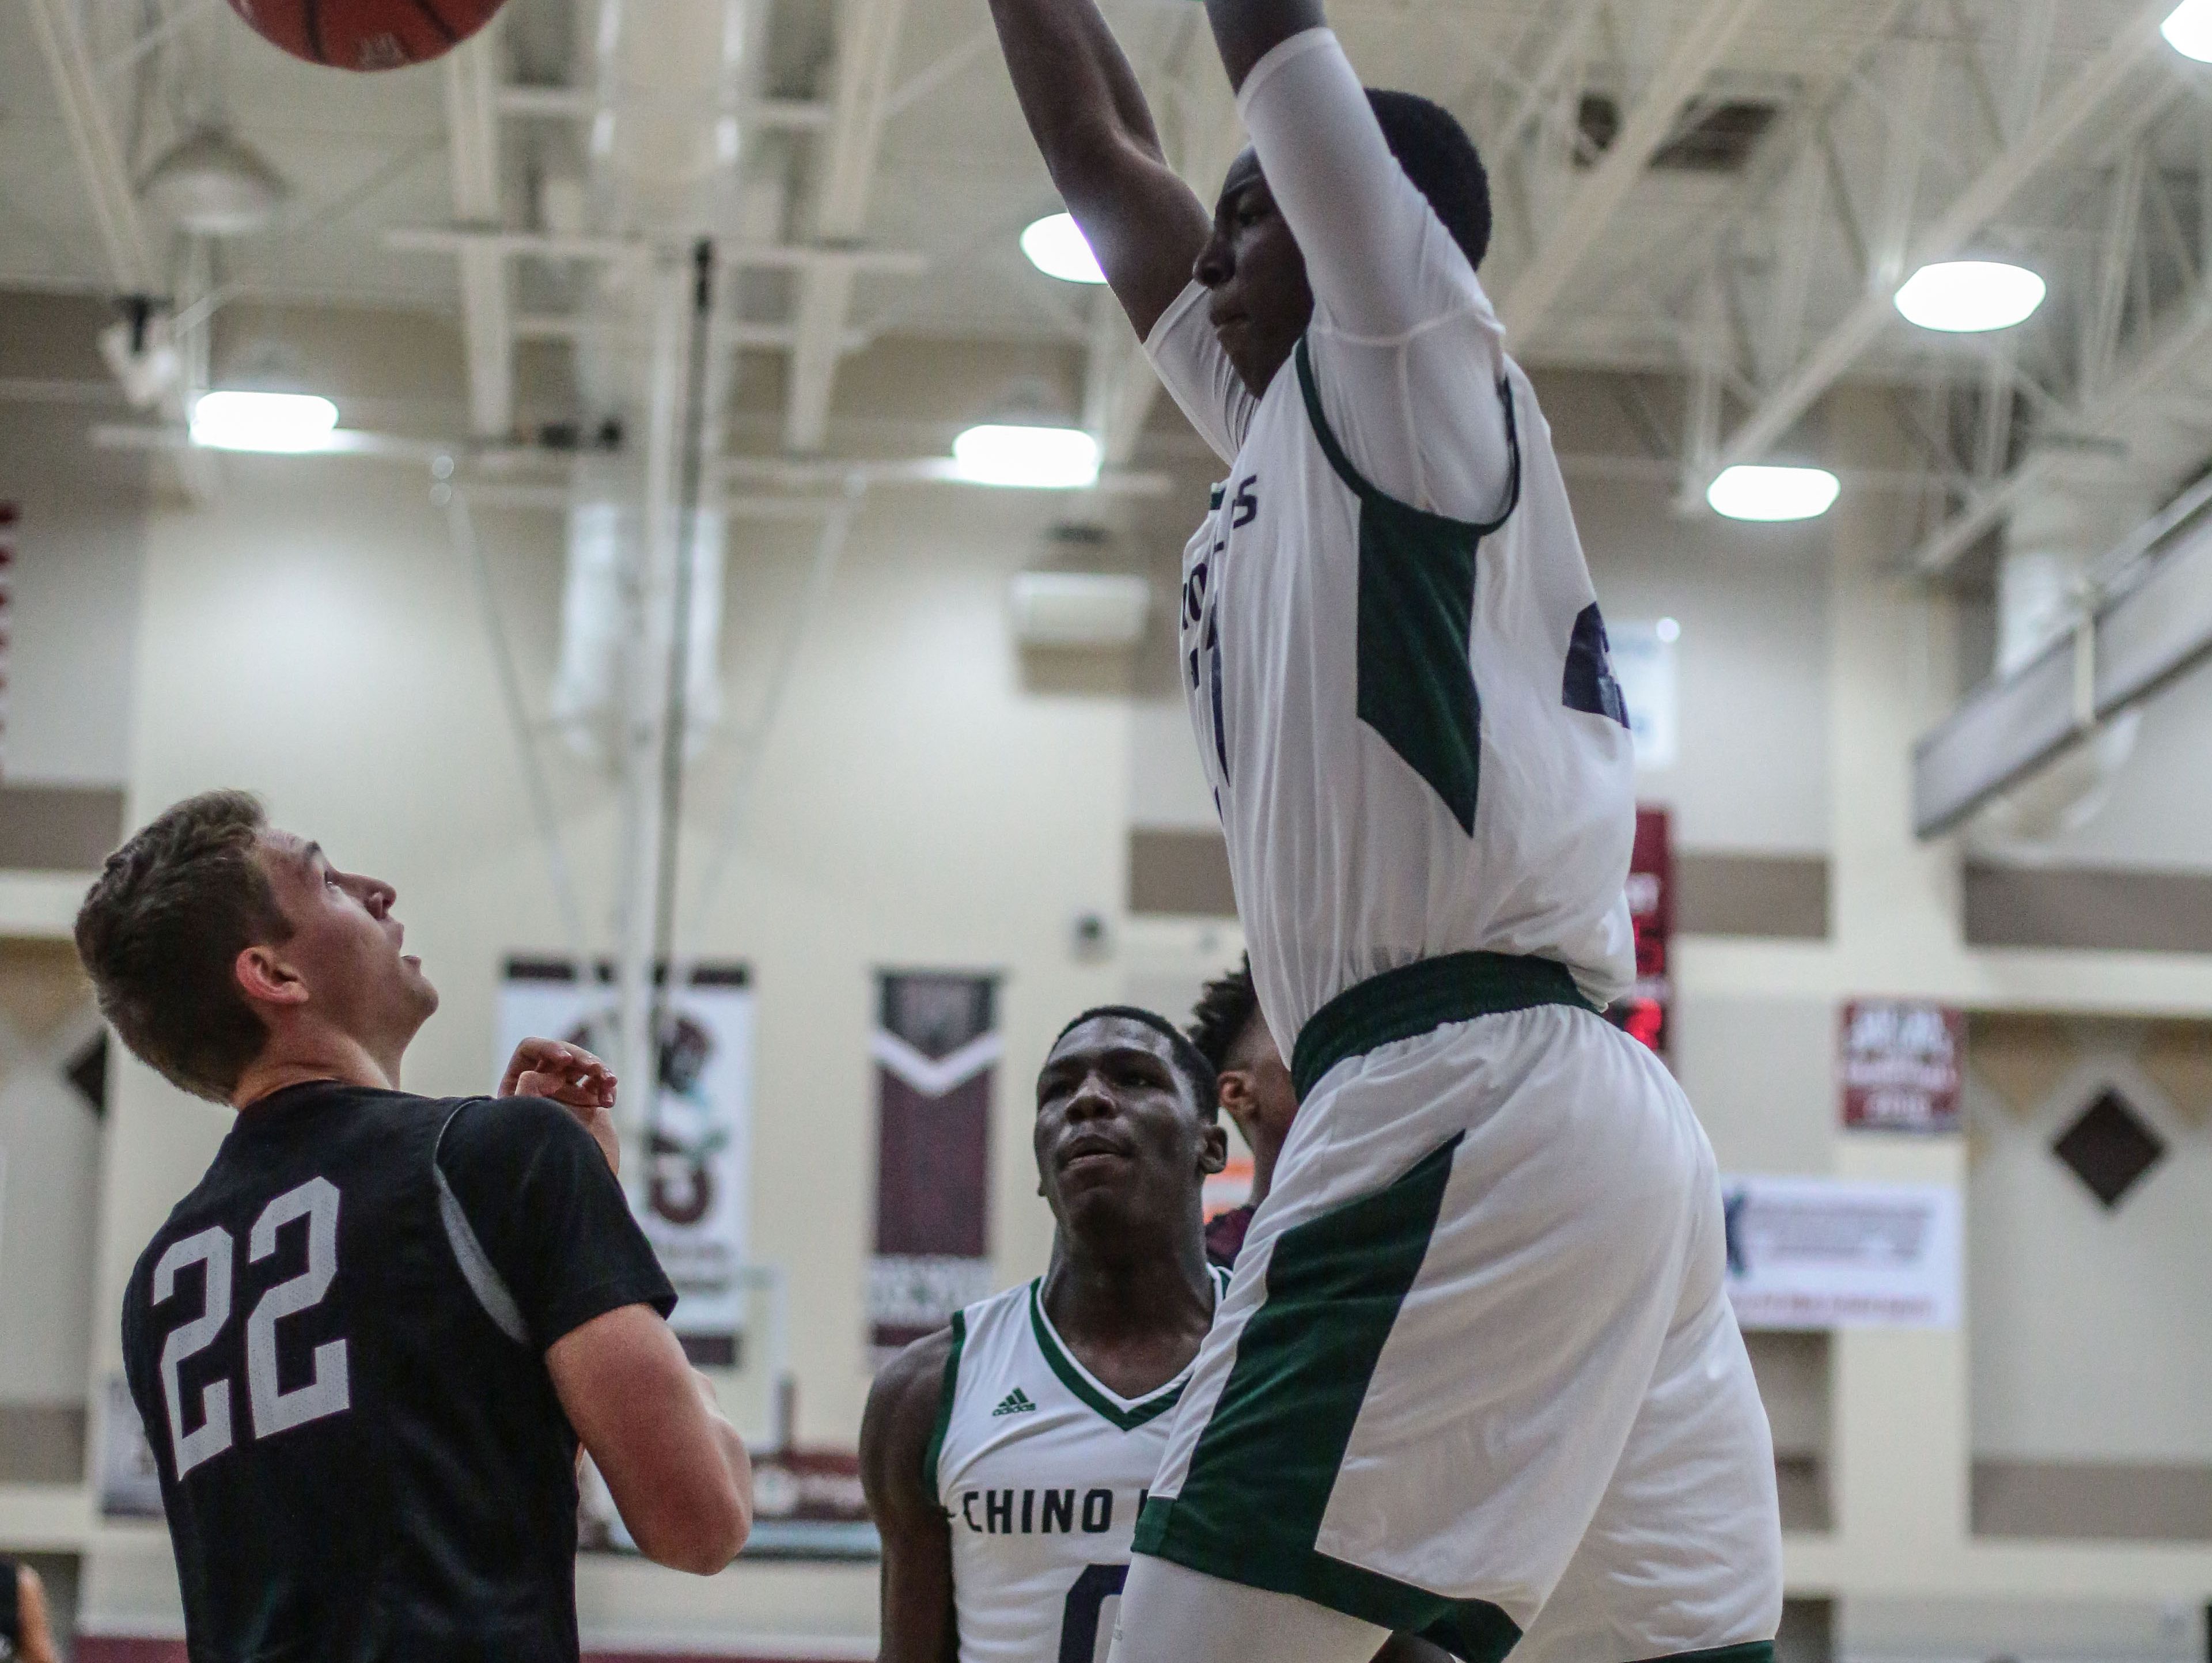 Chino Hills Onyeka Okongwu dunks the ball against Woodcreek on Wednesday, December 28, 2016 during the Rancho Mirage Holiday Invitational at Rancho Mirage High School.